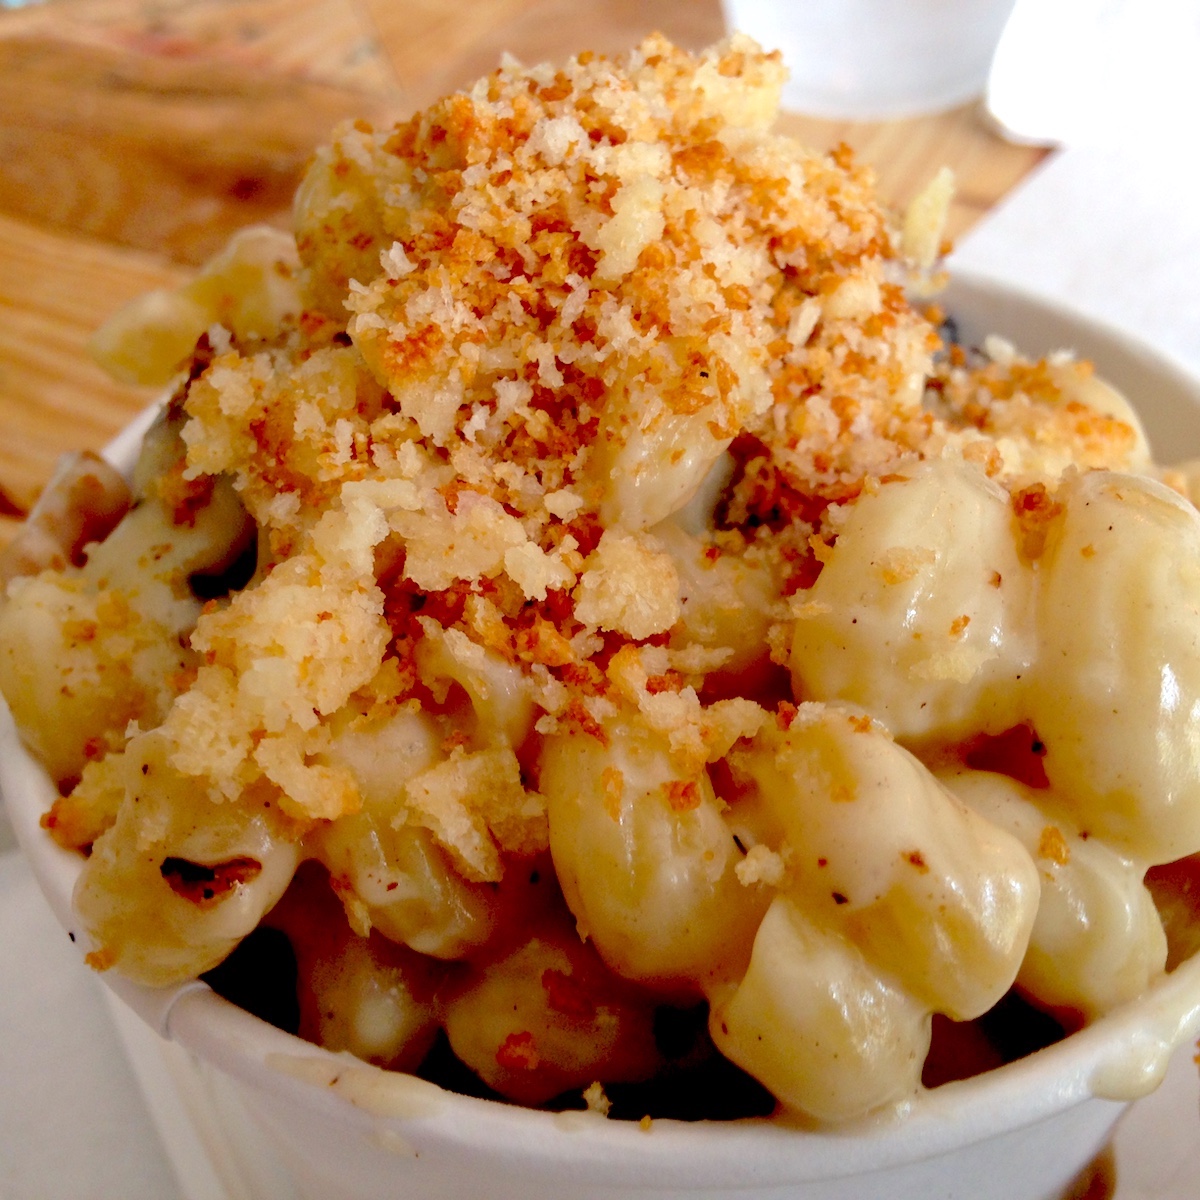 Mac N Cheese from Ms. Cheezious in Miami, Florida